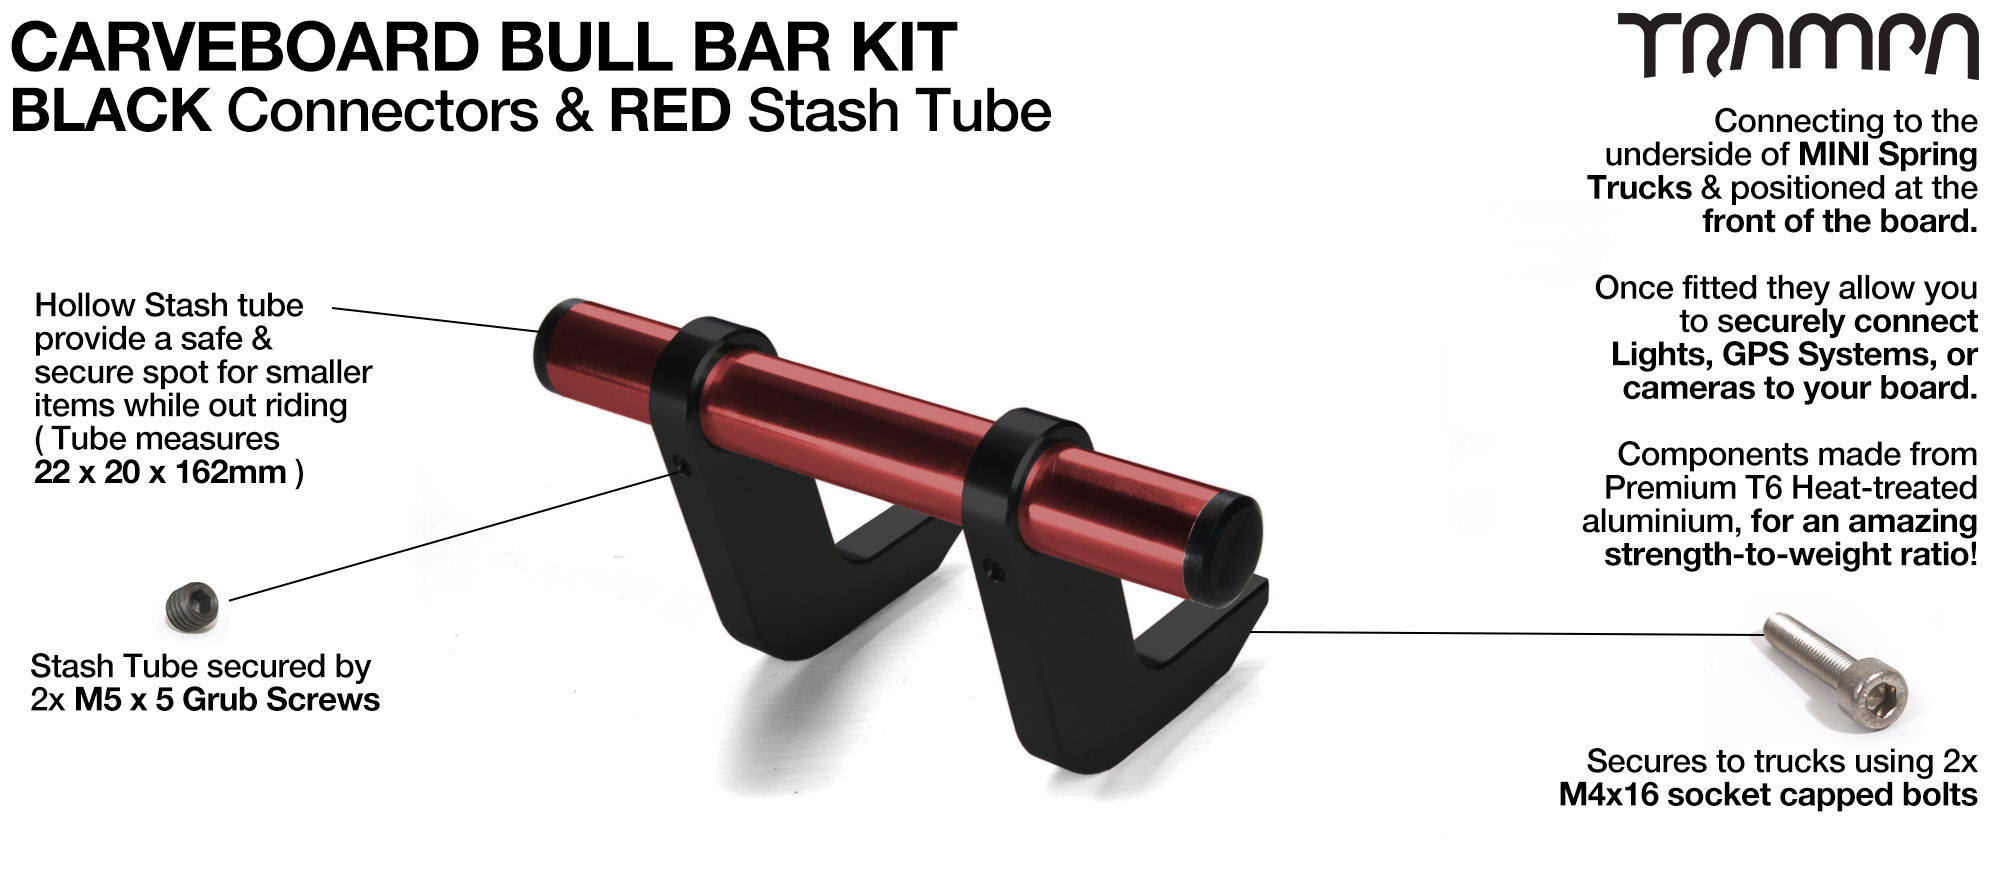 BLACK Uprights & RED Crossbar BULL BARS for CARVE BOARDS using T6 Heat Treated CNC'd AluminIum Clamps, Hollow Aluminium Stash Tubes with Rubber end bungs 